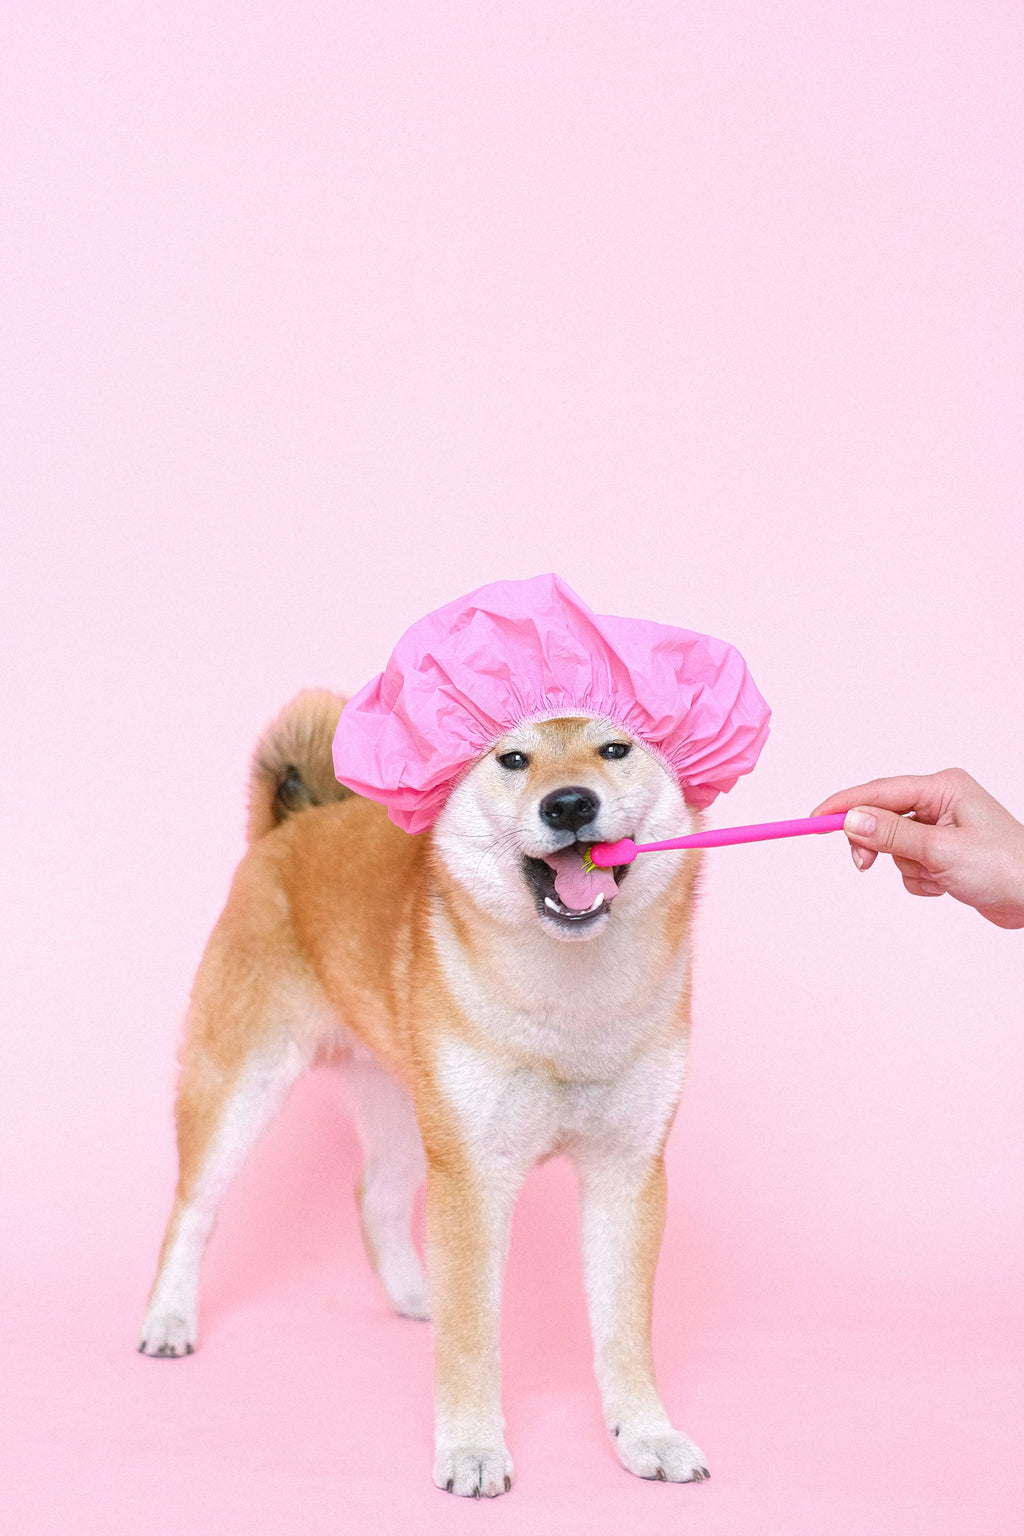 How to Guide: Dog Grooming at Home